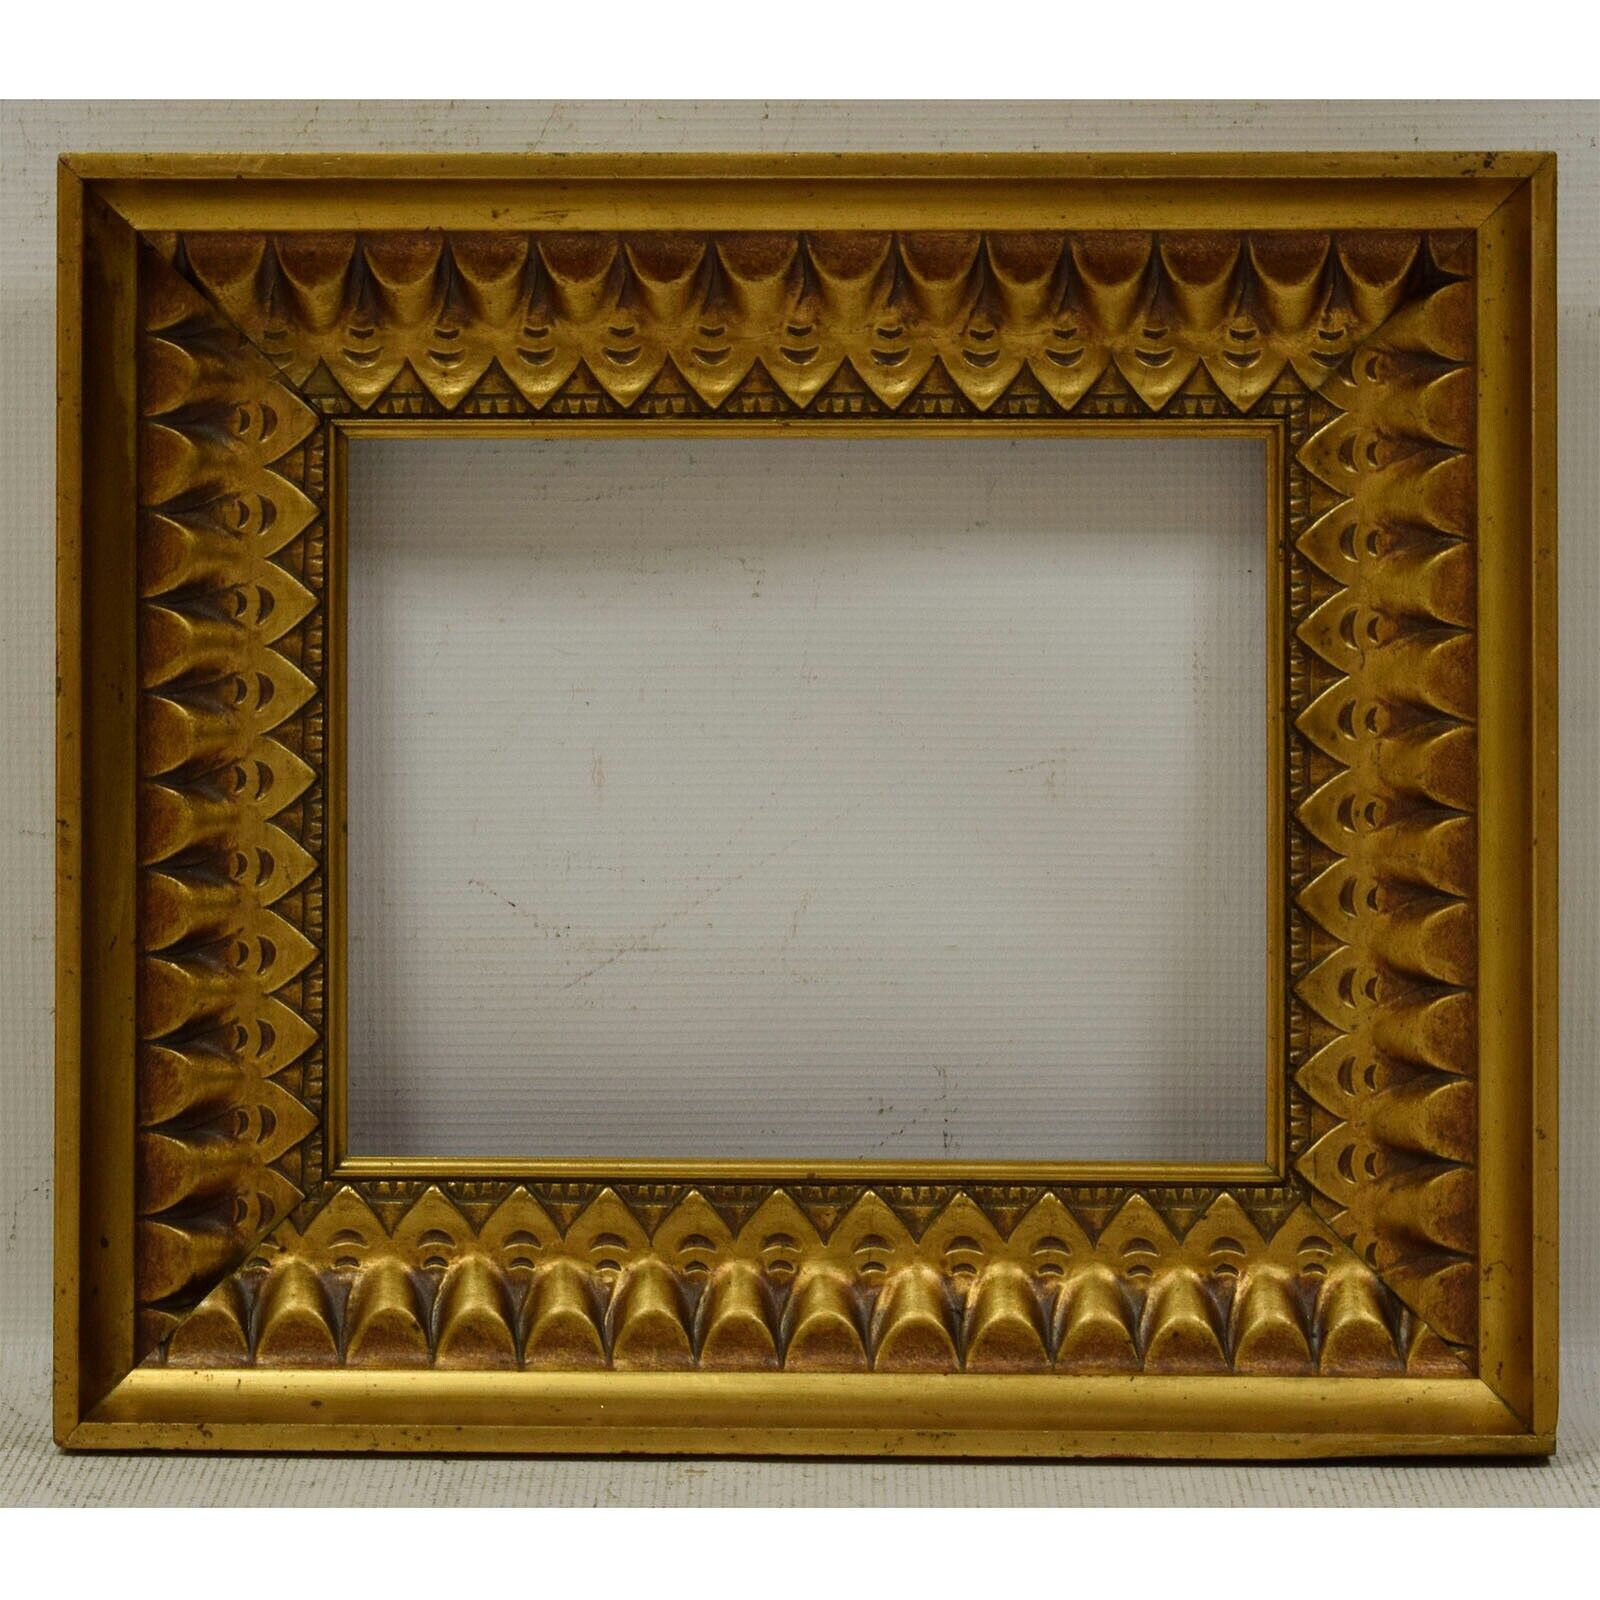 Ca. 1920-1940 Old wooden frame original condition Internal: 10 x 8.1 in